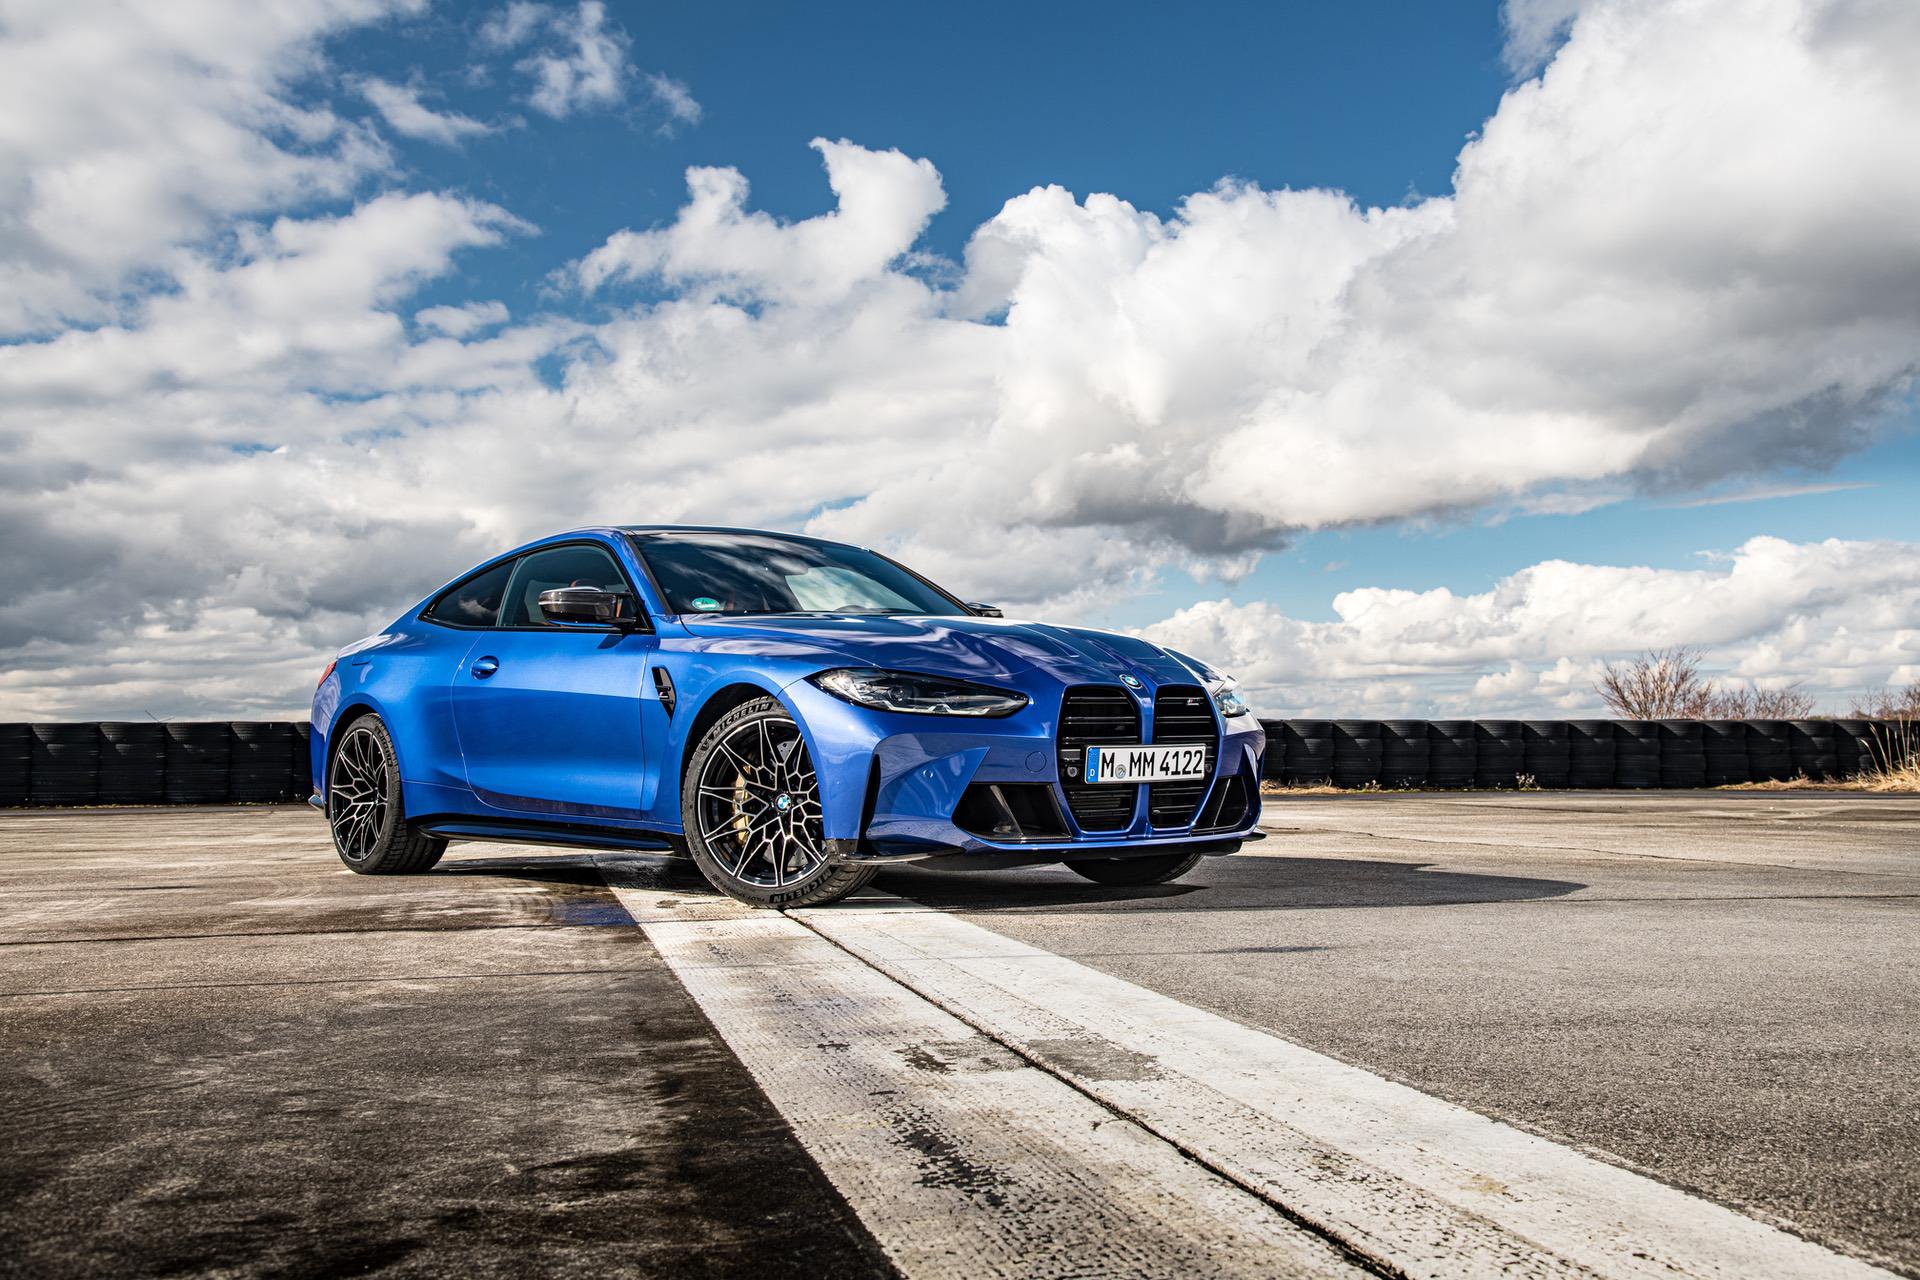 TEST DRIVE: 2021 BMW M4 Competition – Your Race Car For Everyday Driving